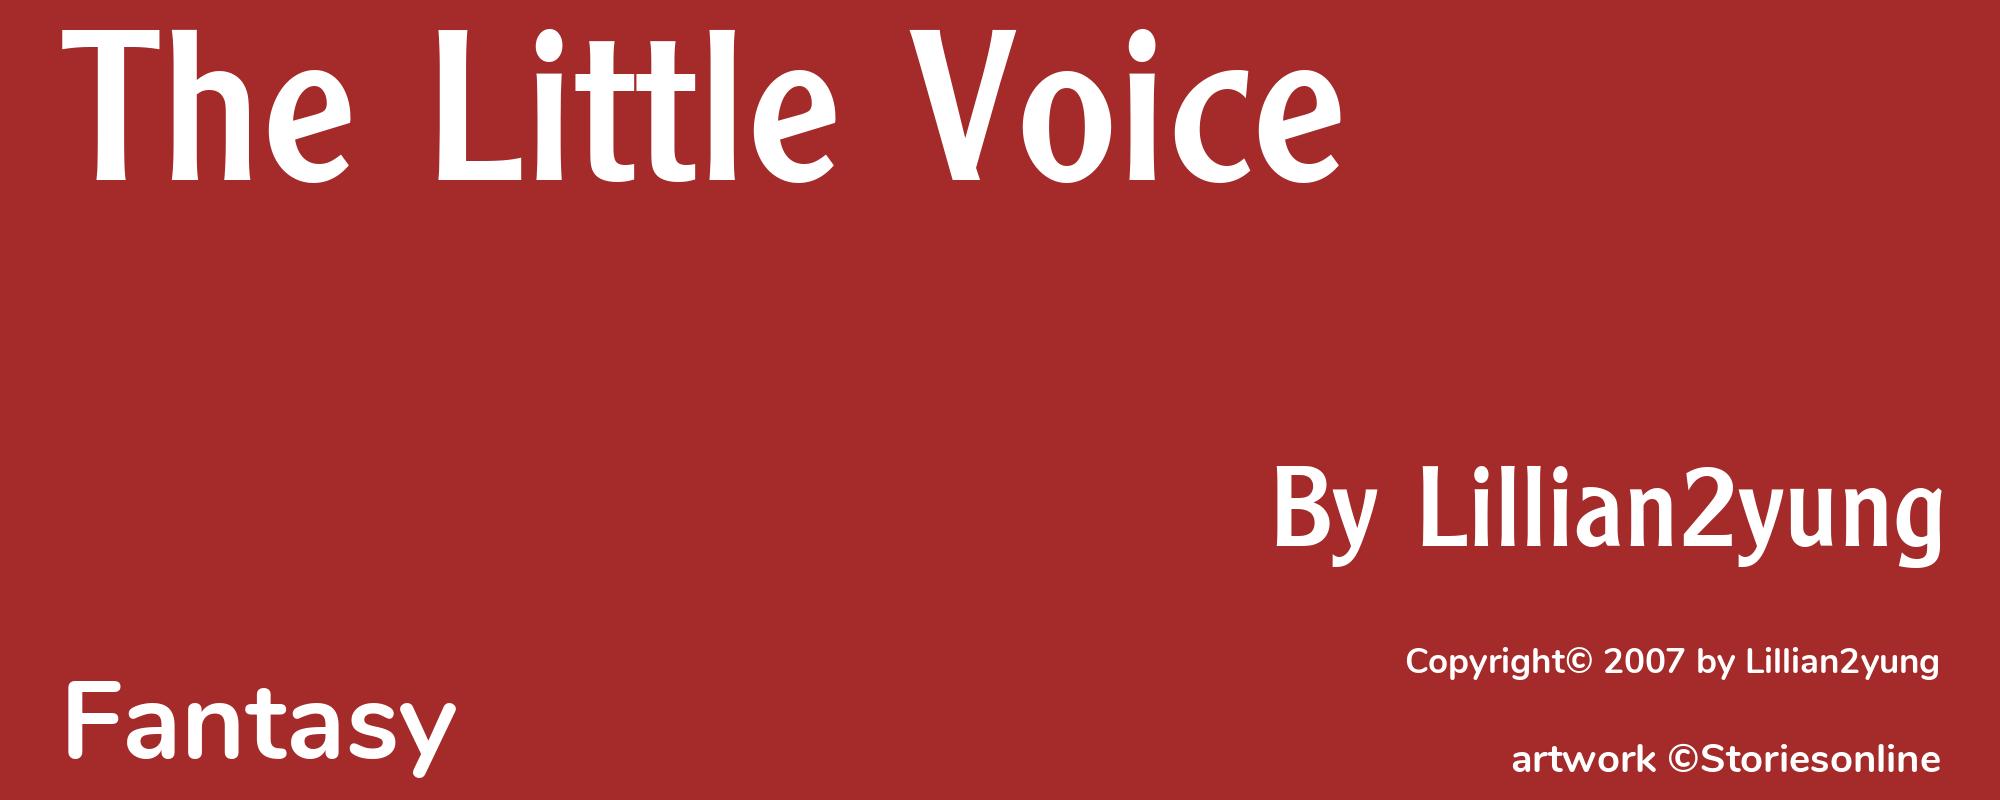 The Little Voice - Cover